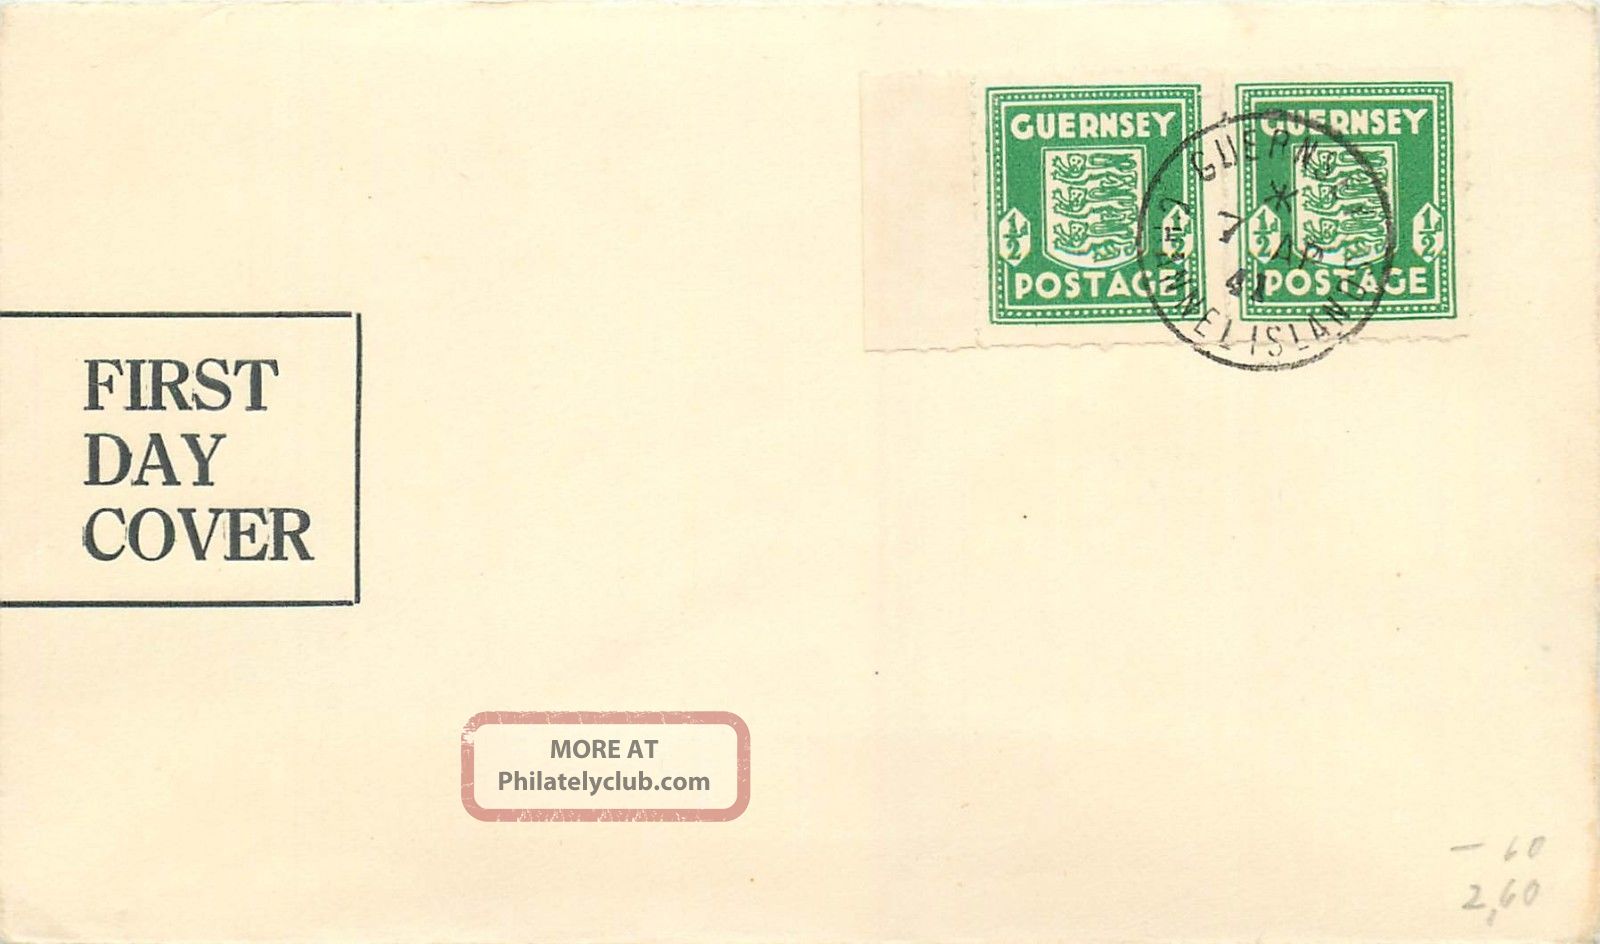 Great Britain / Guernsey 1941 First Day Cover Wwii Occupation Sg 1 - 1/2d Pair Worldwide photo